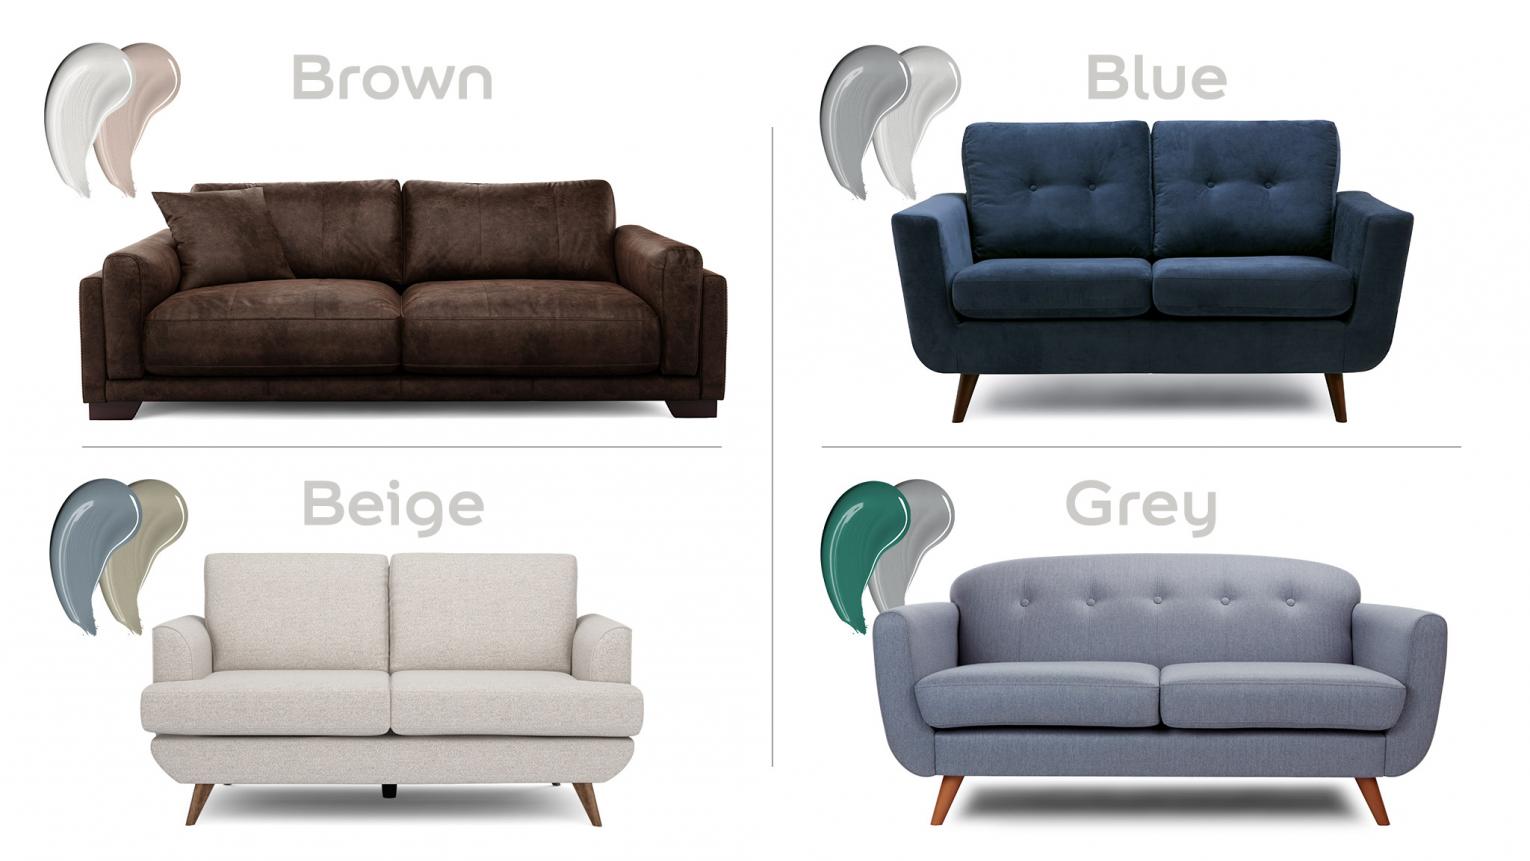 8 Paint Colours To Match Your Sofa Dulux, What Colours Goes With Brown Sofa